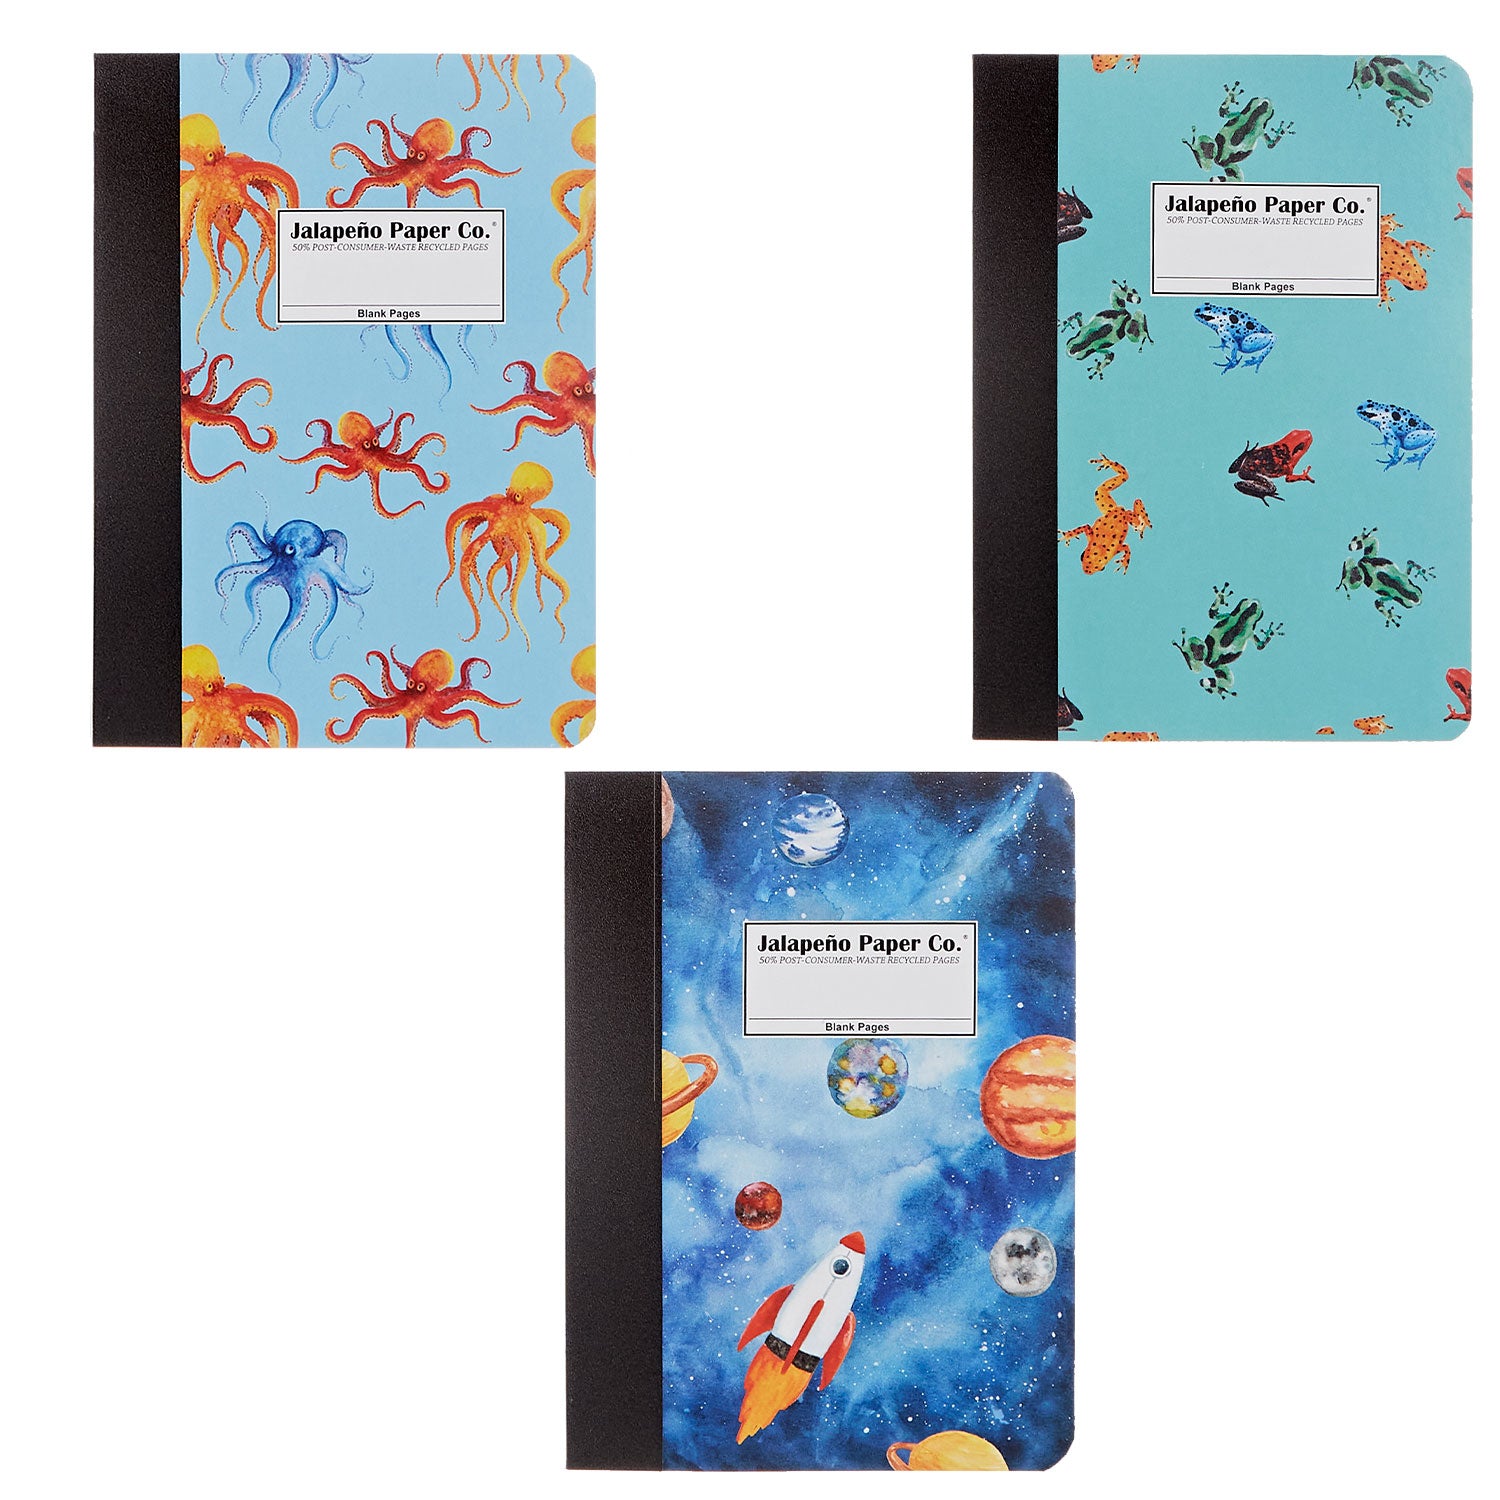 Set of 3 notebooks printed with octopuses, frogs and a spaceship